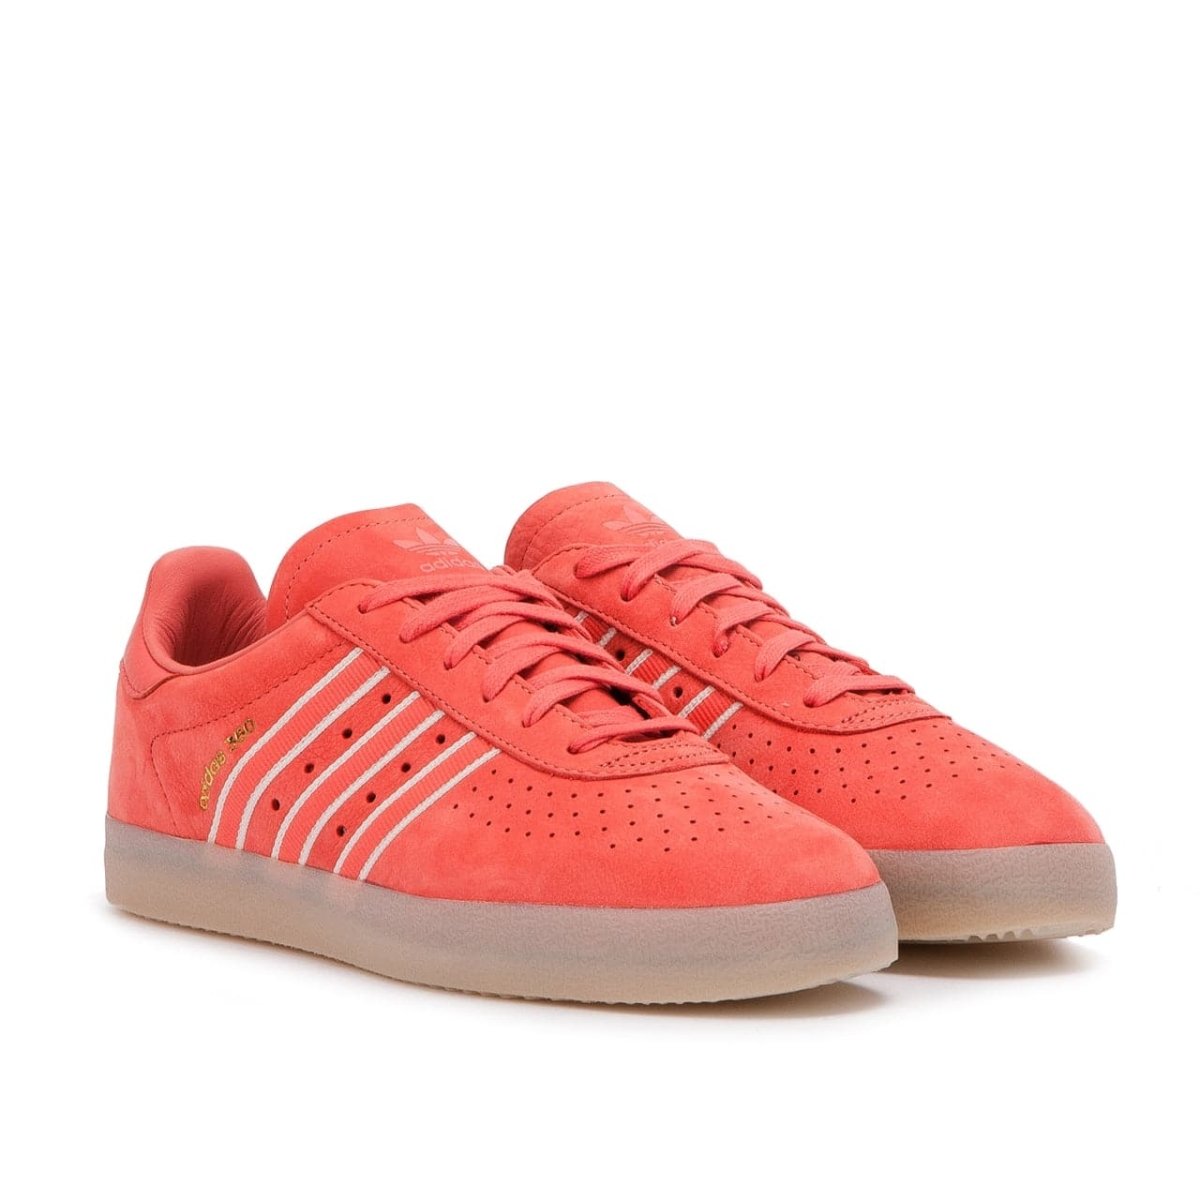 adidas  x Oyster 350 (Rot / Weiß / Gold)  - Allike Store